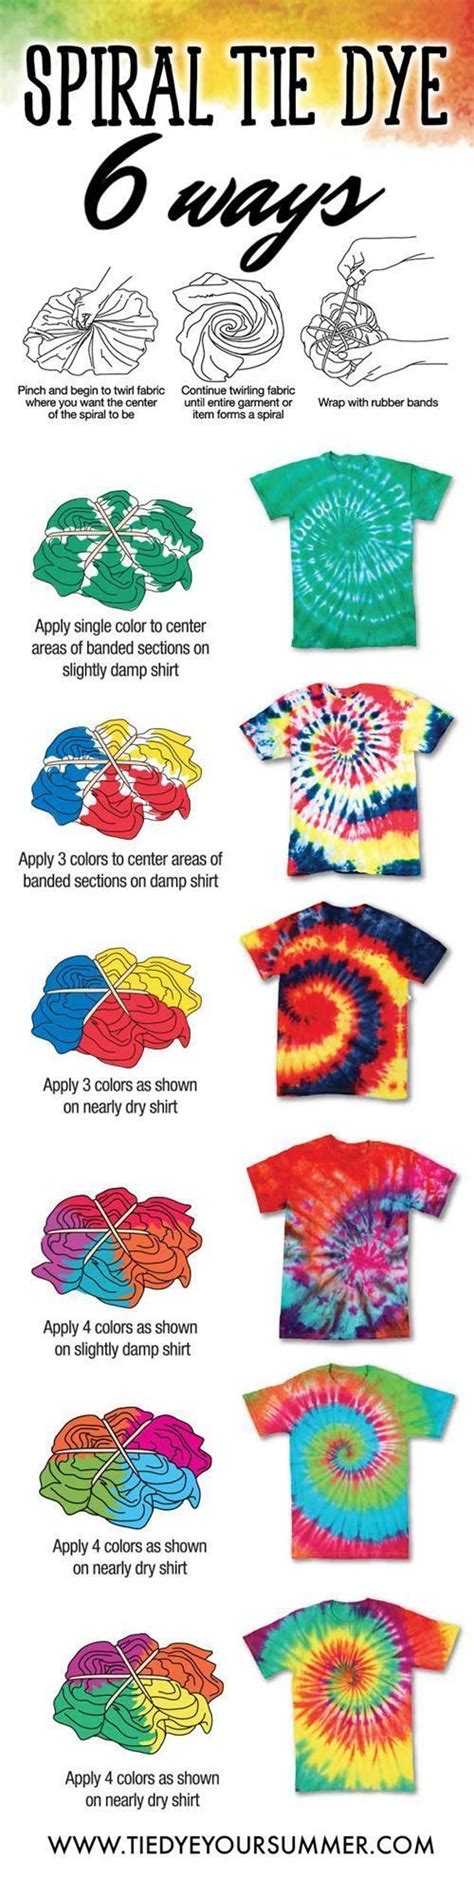 Tie Dye Your Summer With One Of These Cool Spiral Tie Dye Shirt Ideas